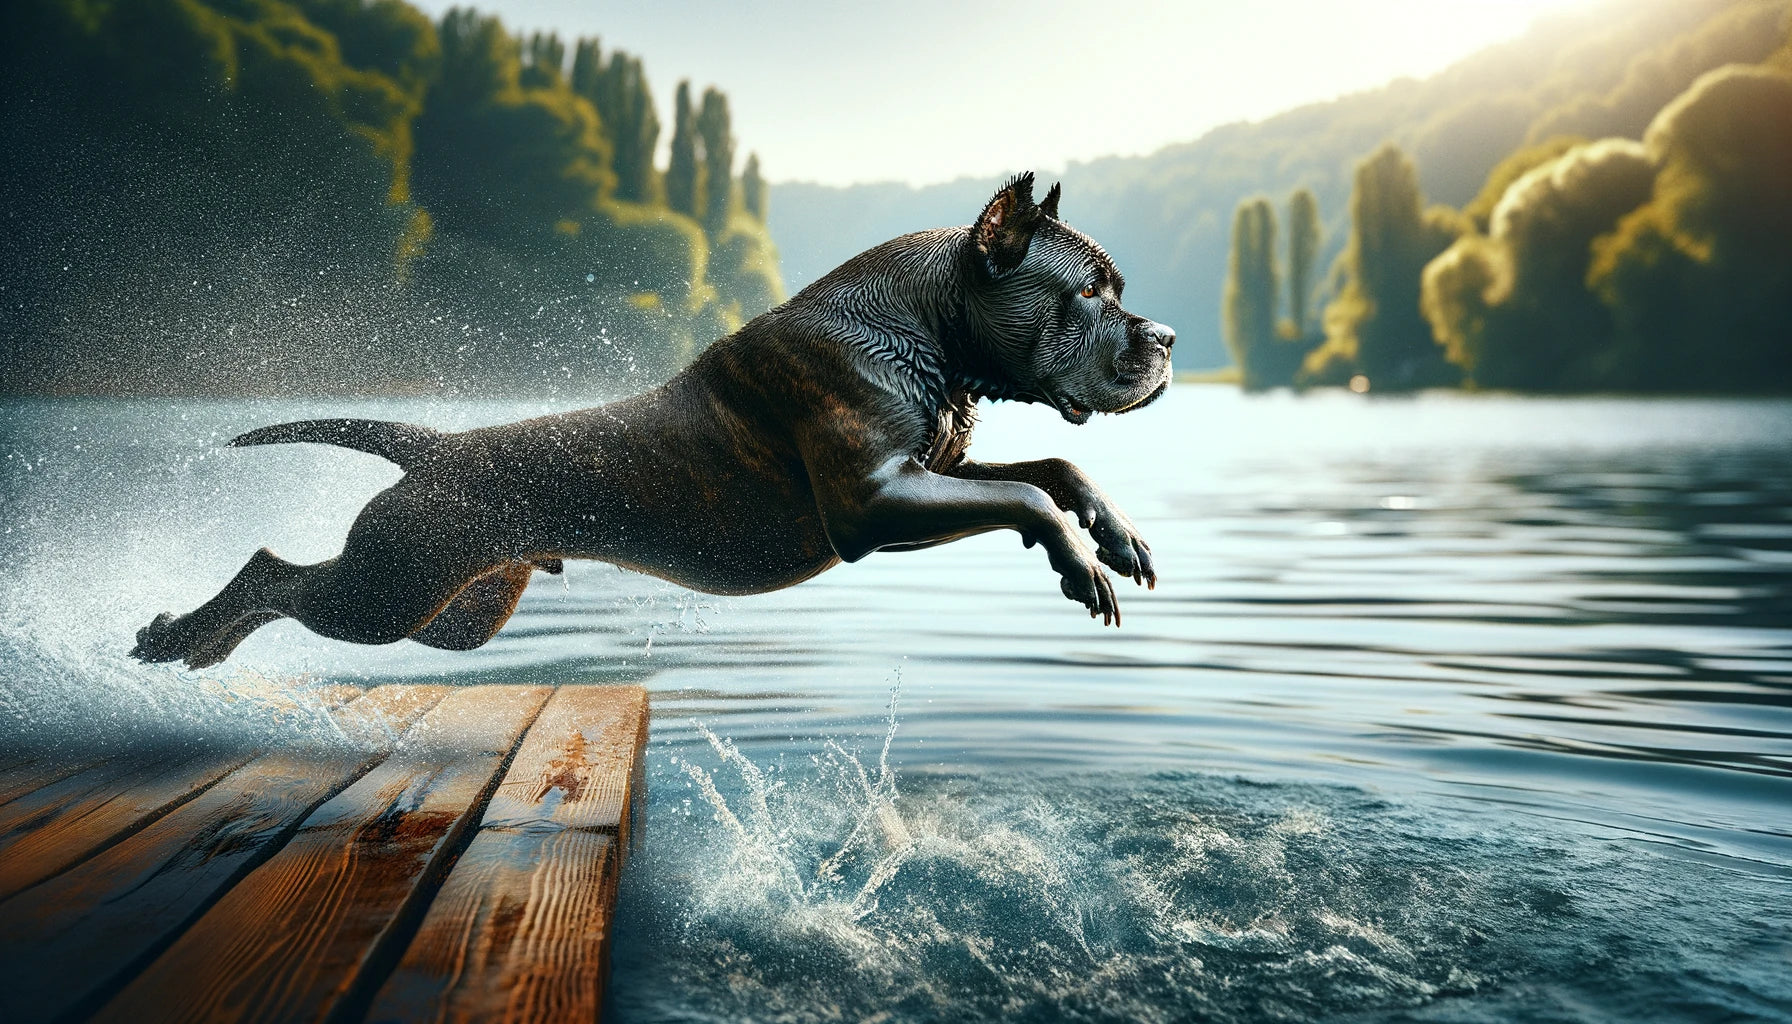 Cane Corso participating in water sports at a lake, showing the dog energetically diving in water.